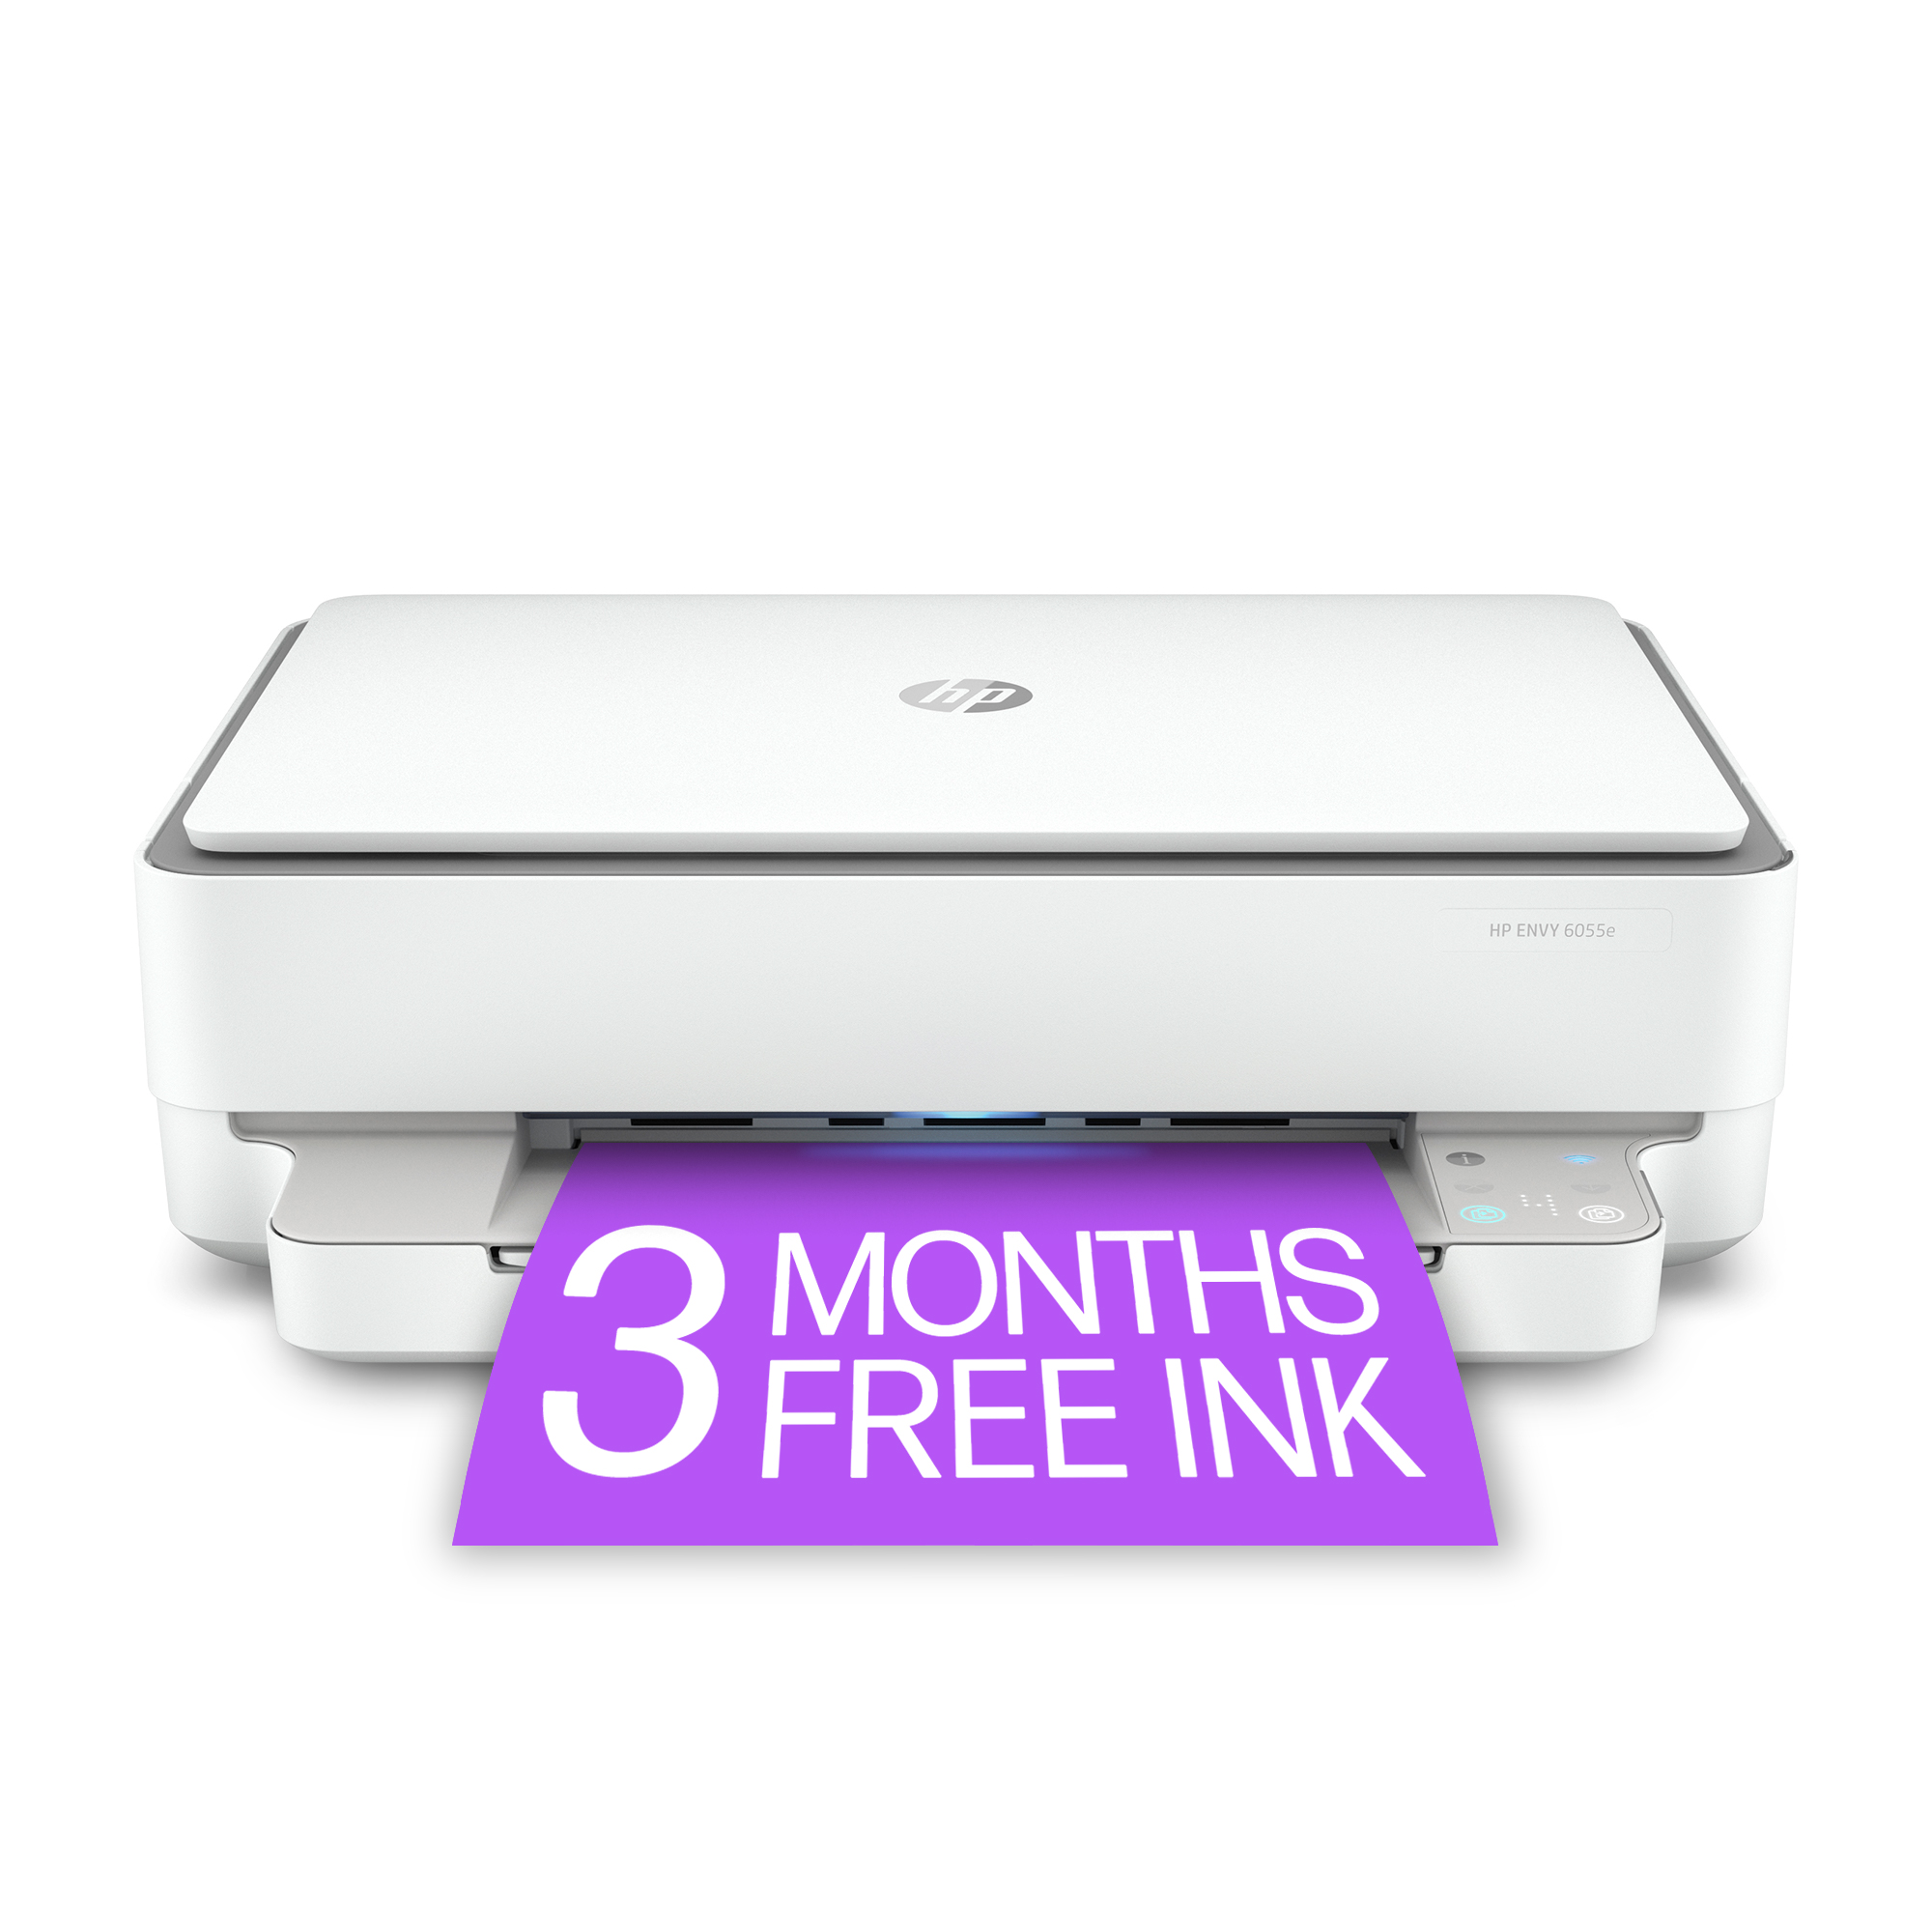 HP ENVY 6055e Wireless Printer with months Instant Ink with HP+ White ENVY 6055e - Best Buy